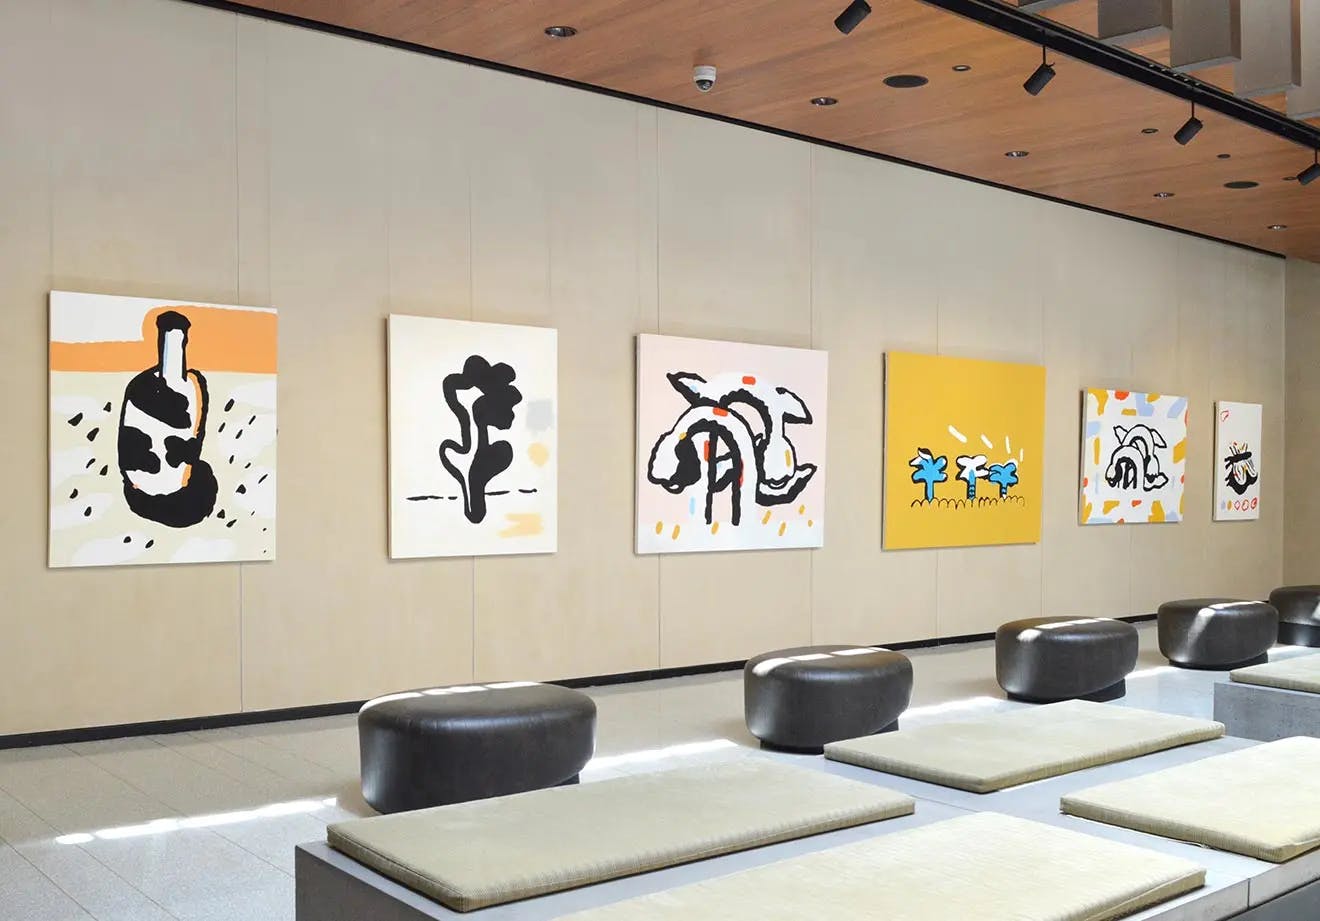 Artwork installed as part of Courtyard at Gotham West, one of Uprise Art's Exhibitions in New York, NY.